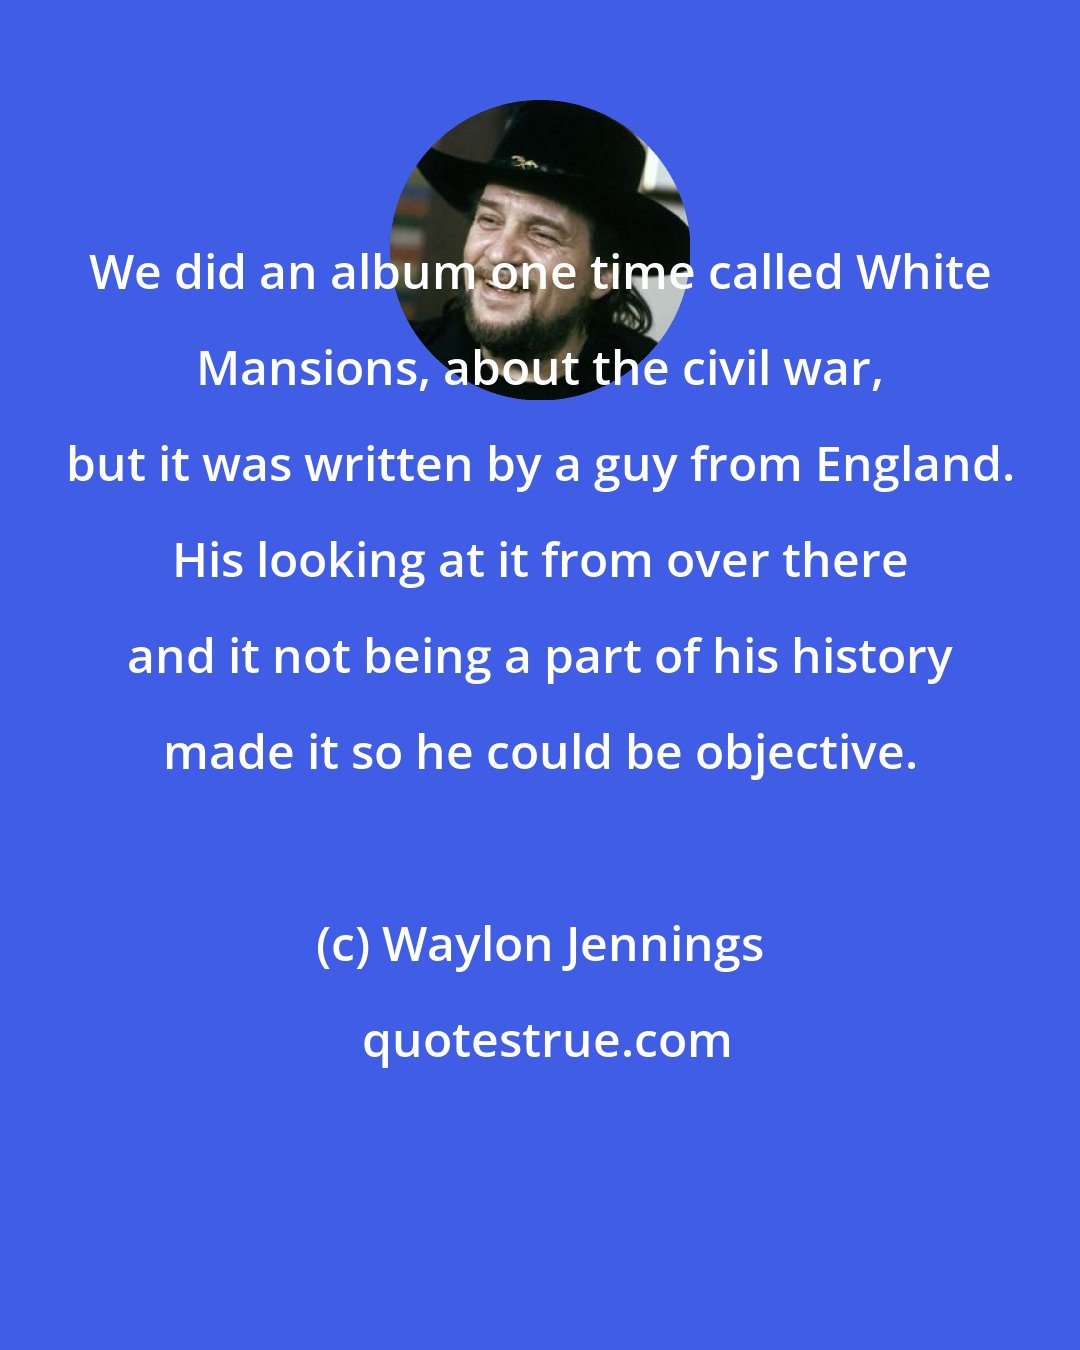 Waylon Jennings: We did an album one time called White Mansions, about the civil war, but it was written by a guy from England. His looking at it from over there and it not being a part of his history made it so he could be objective.